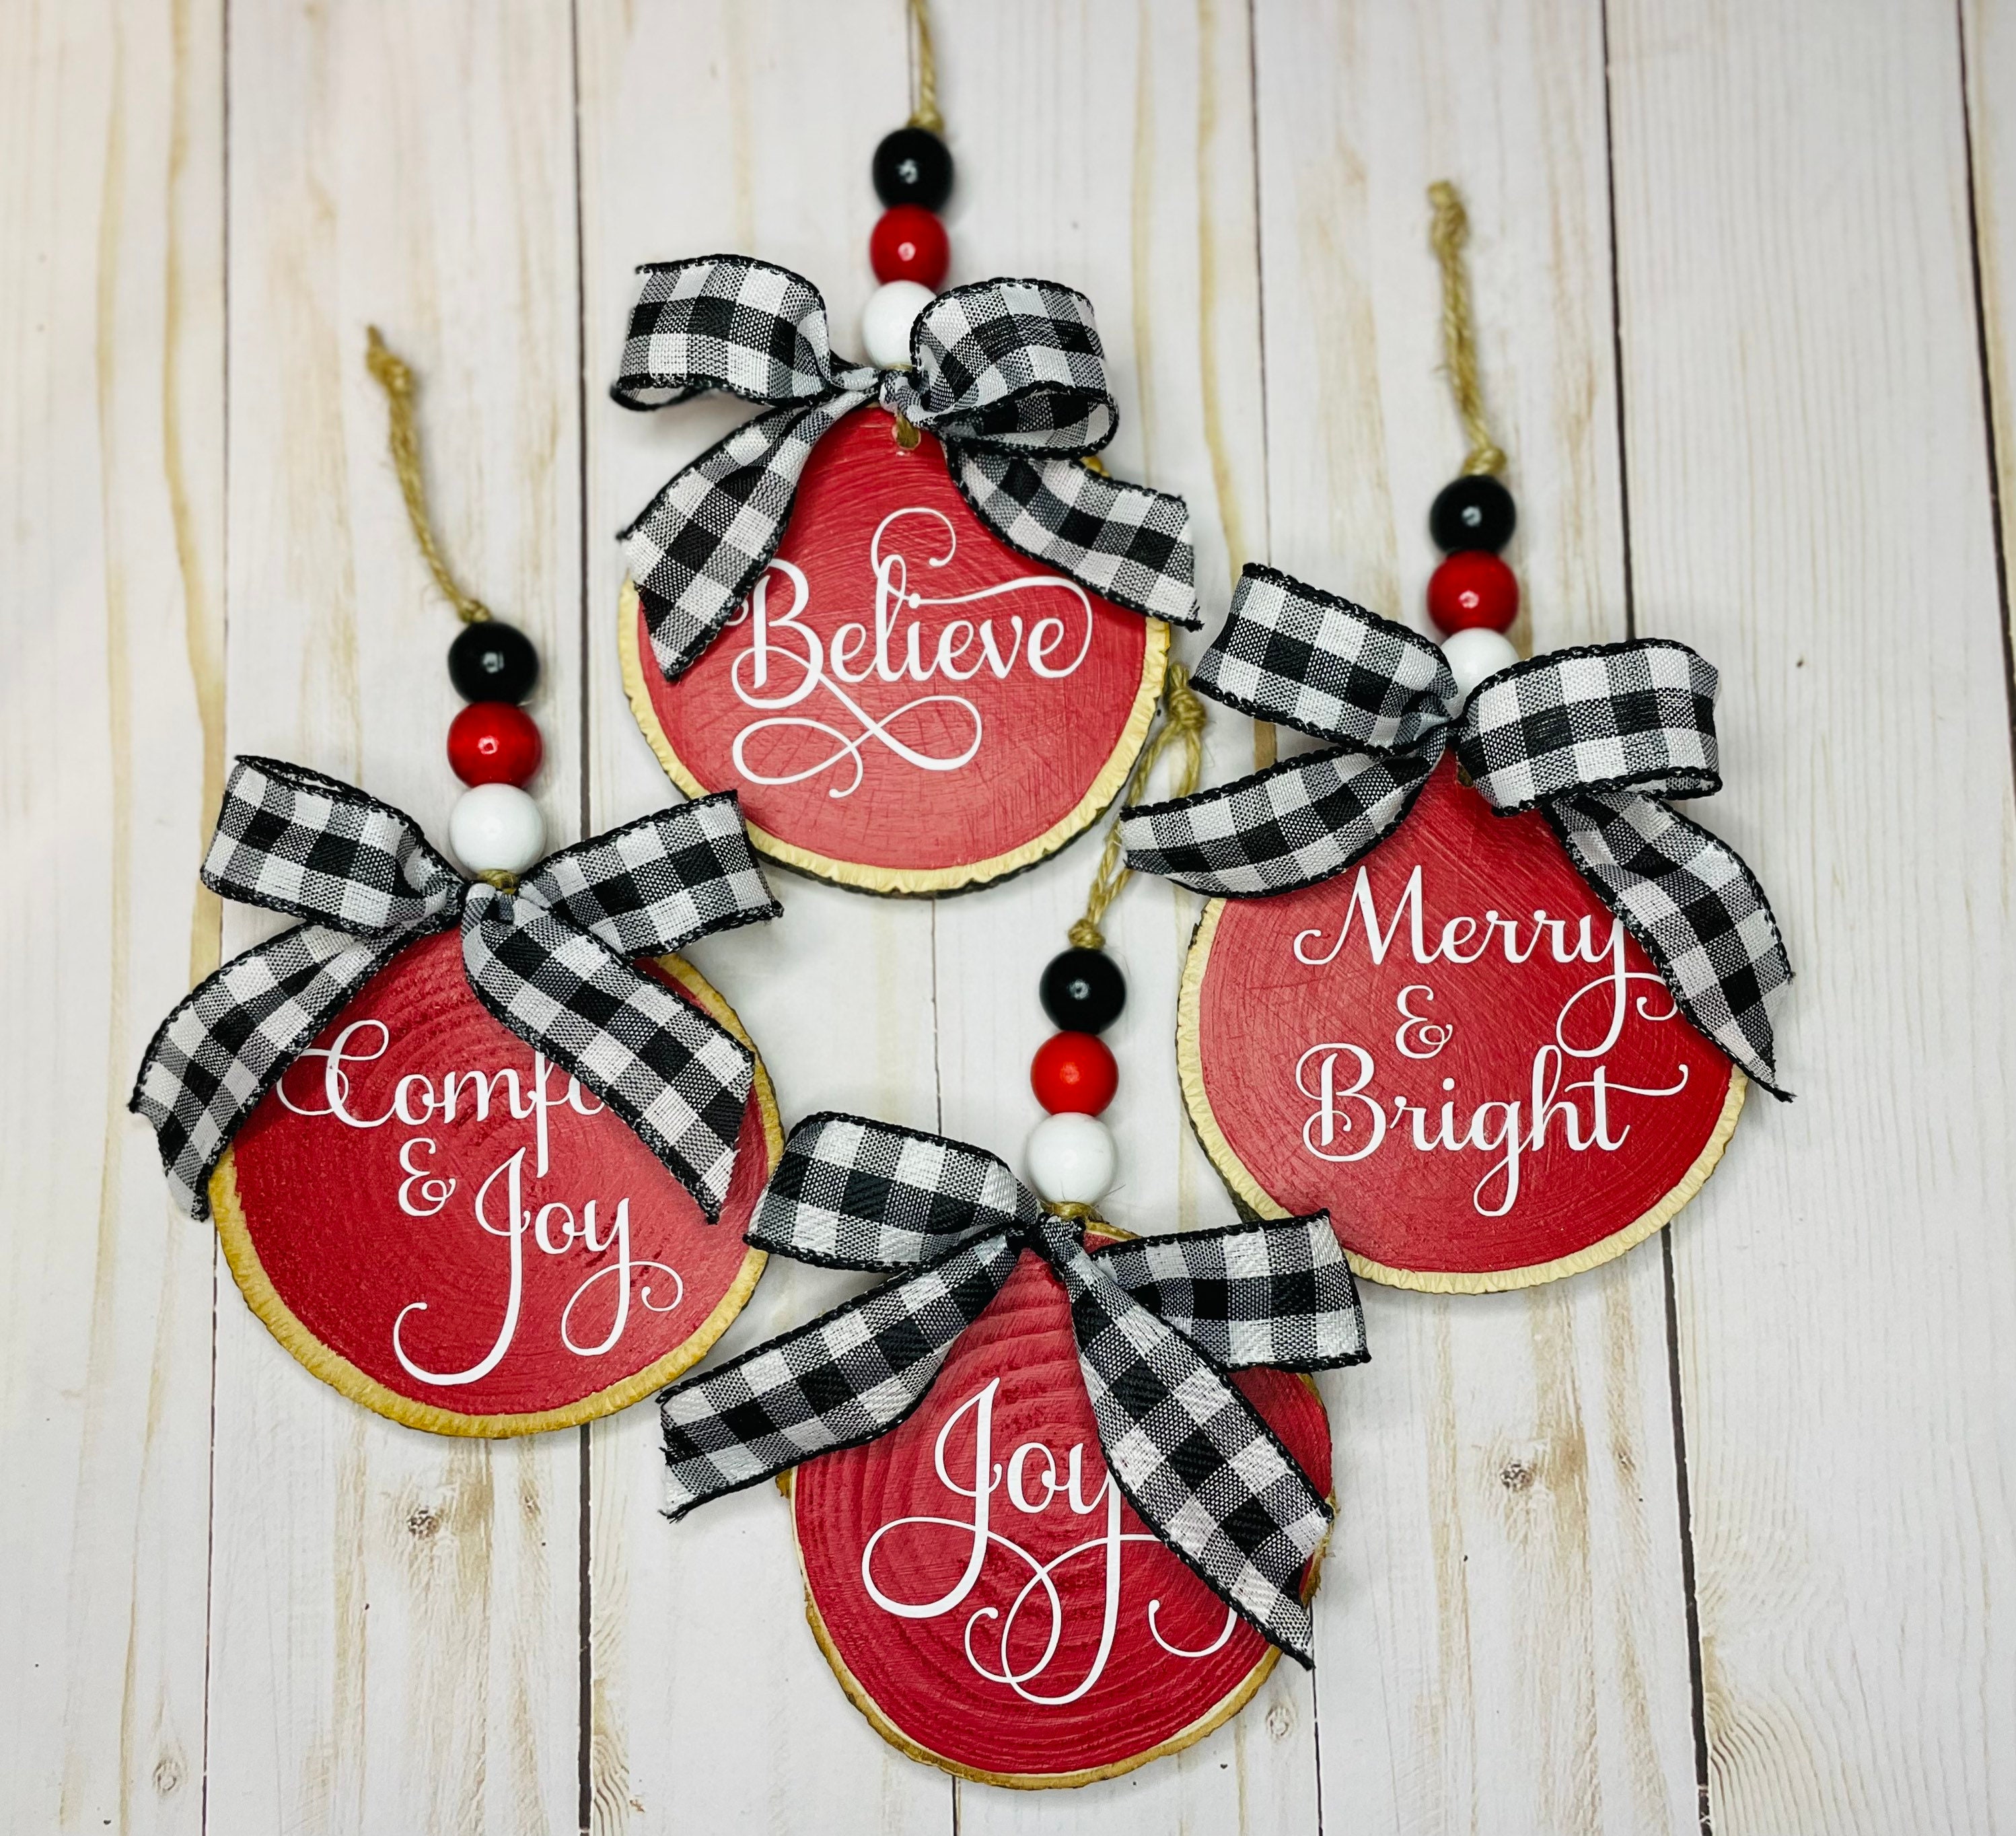 OurWarm 50pcs DIY Wooden Christmas Ornaments for Crafts, 4 Unfinished  Round Wood Ornaments with Buffalo Plaid Bows and Beads, Natural Wood  Circles